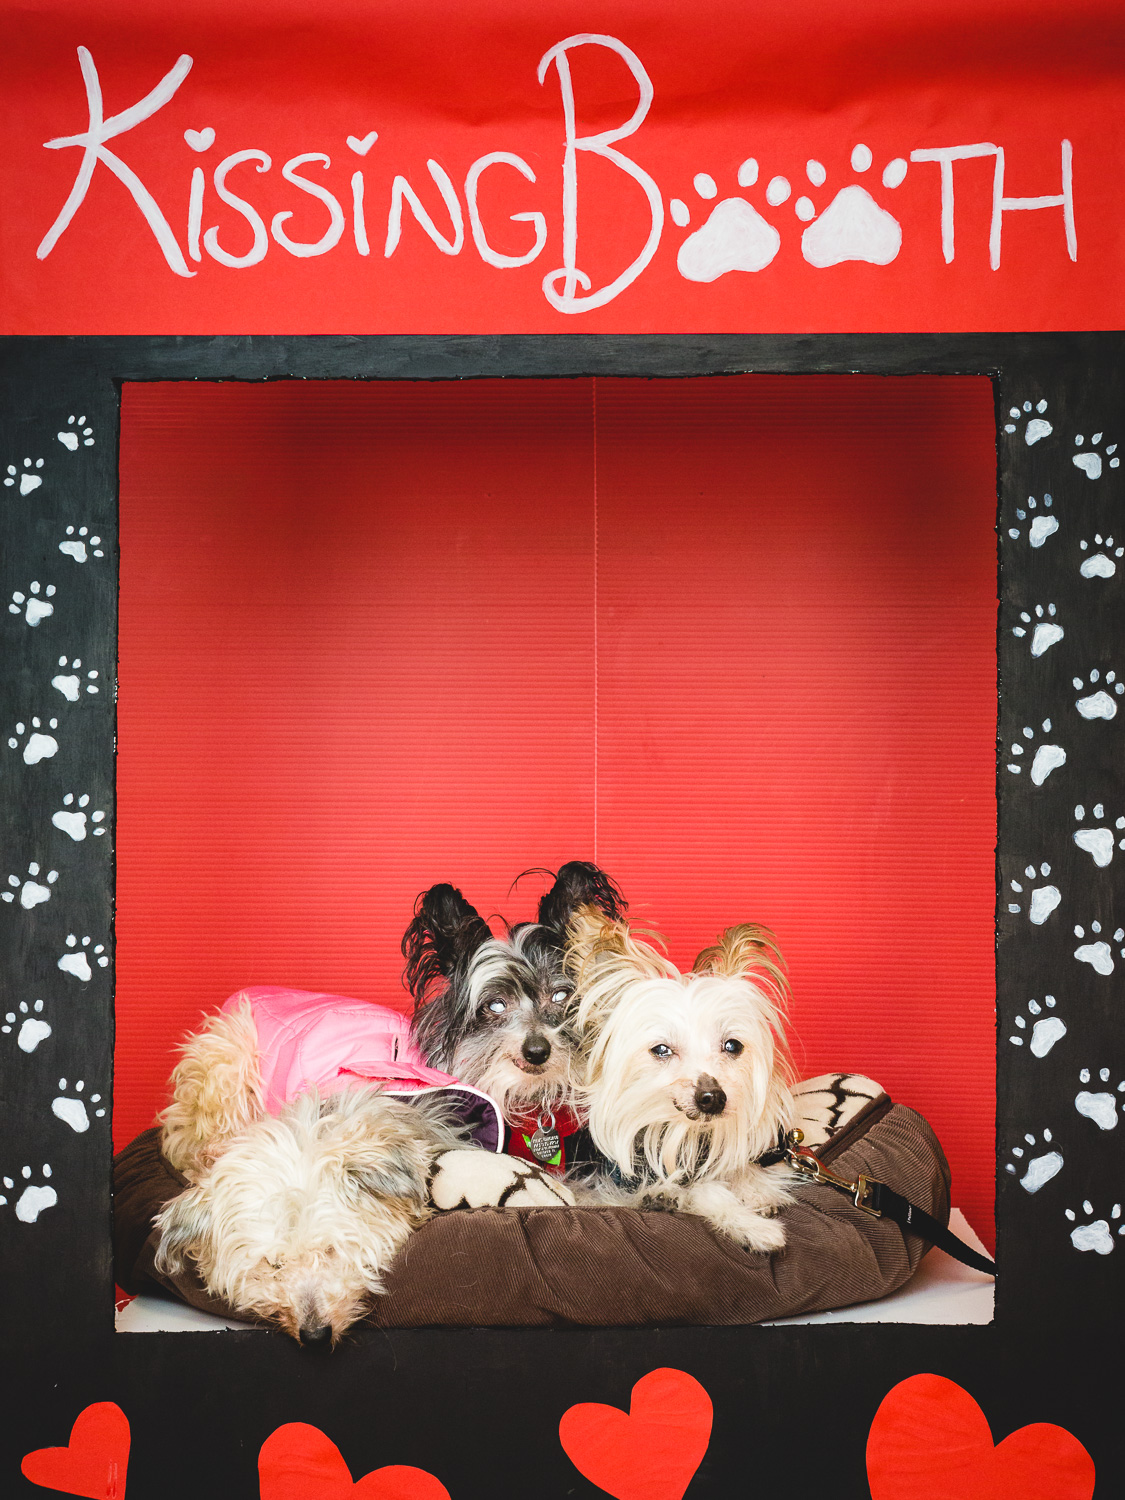 Dog Kissing Booth In Chicago